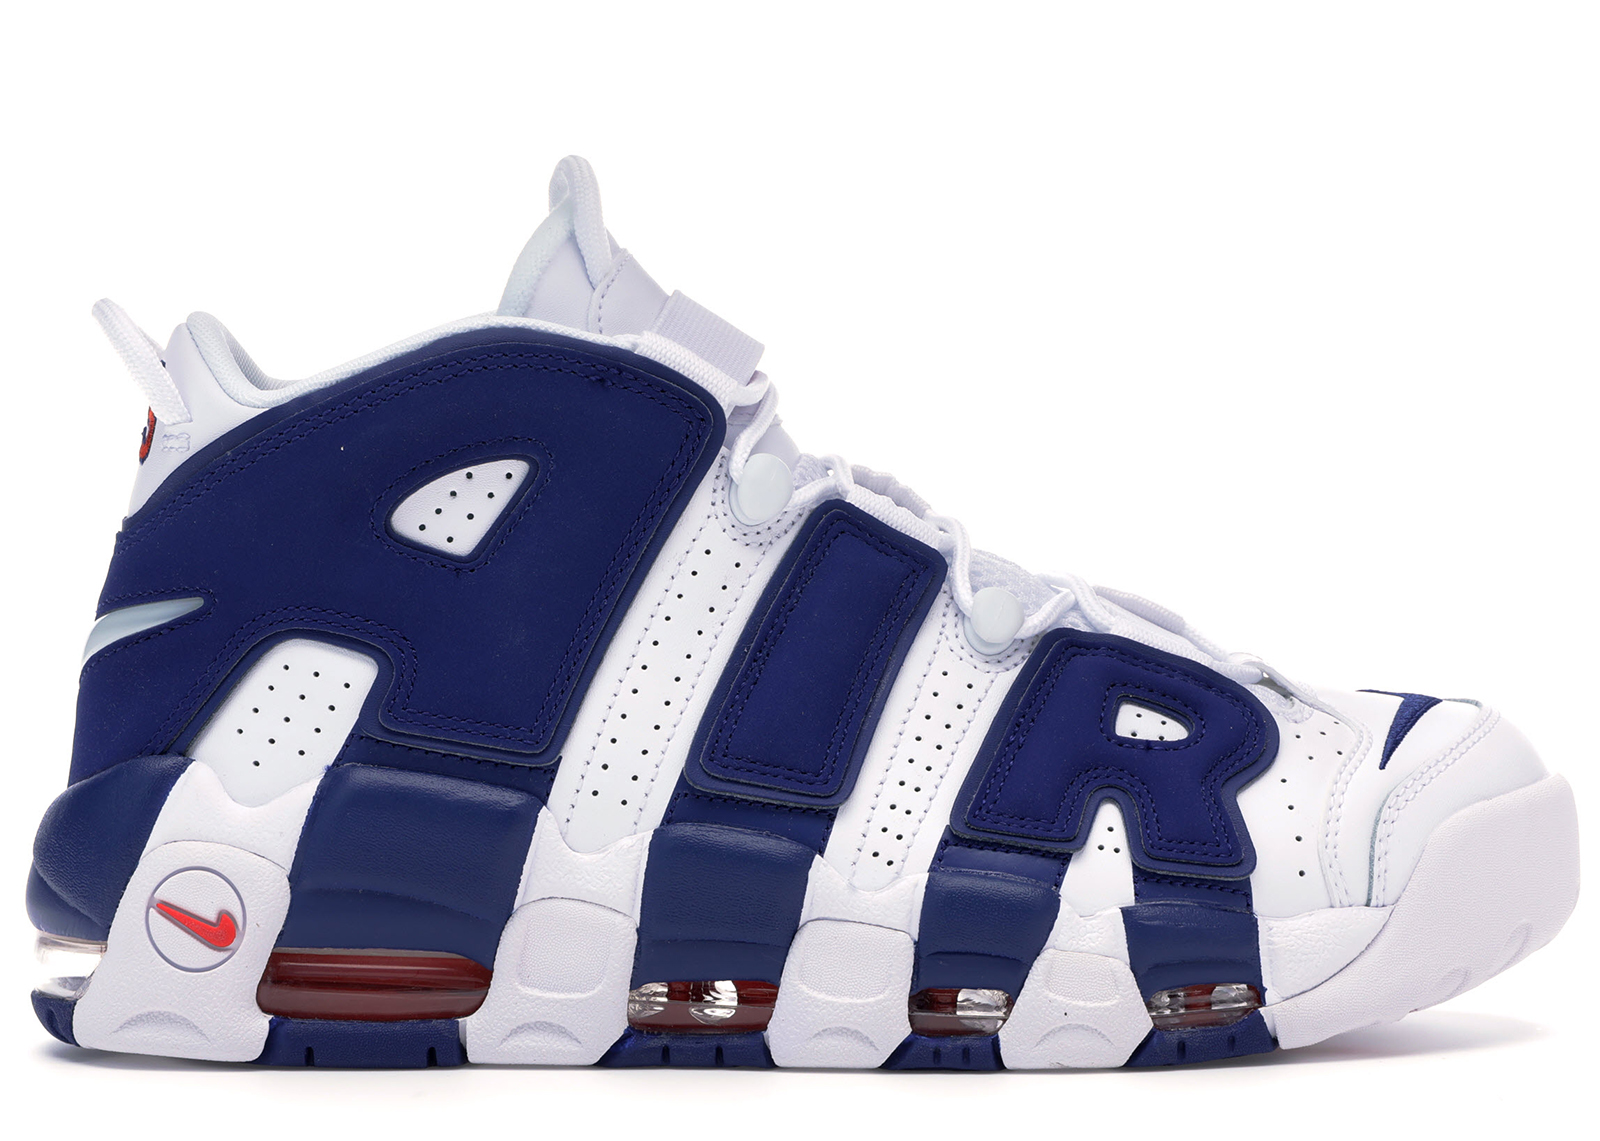 the new uptempos